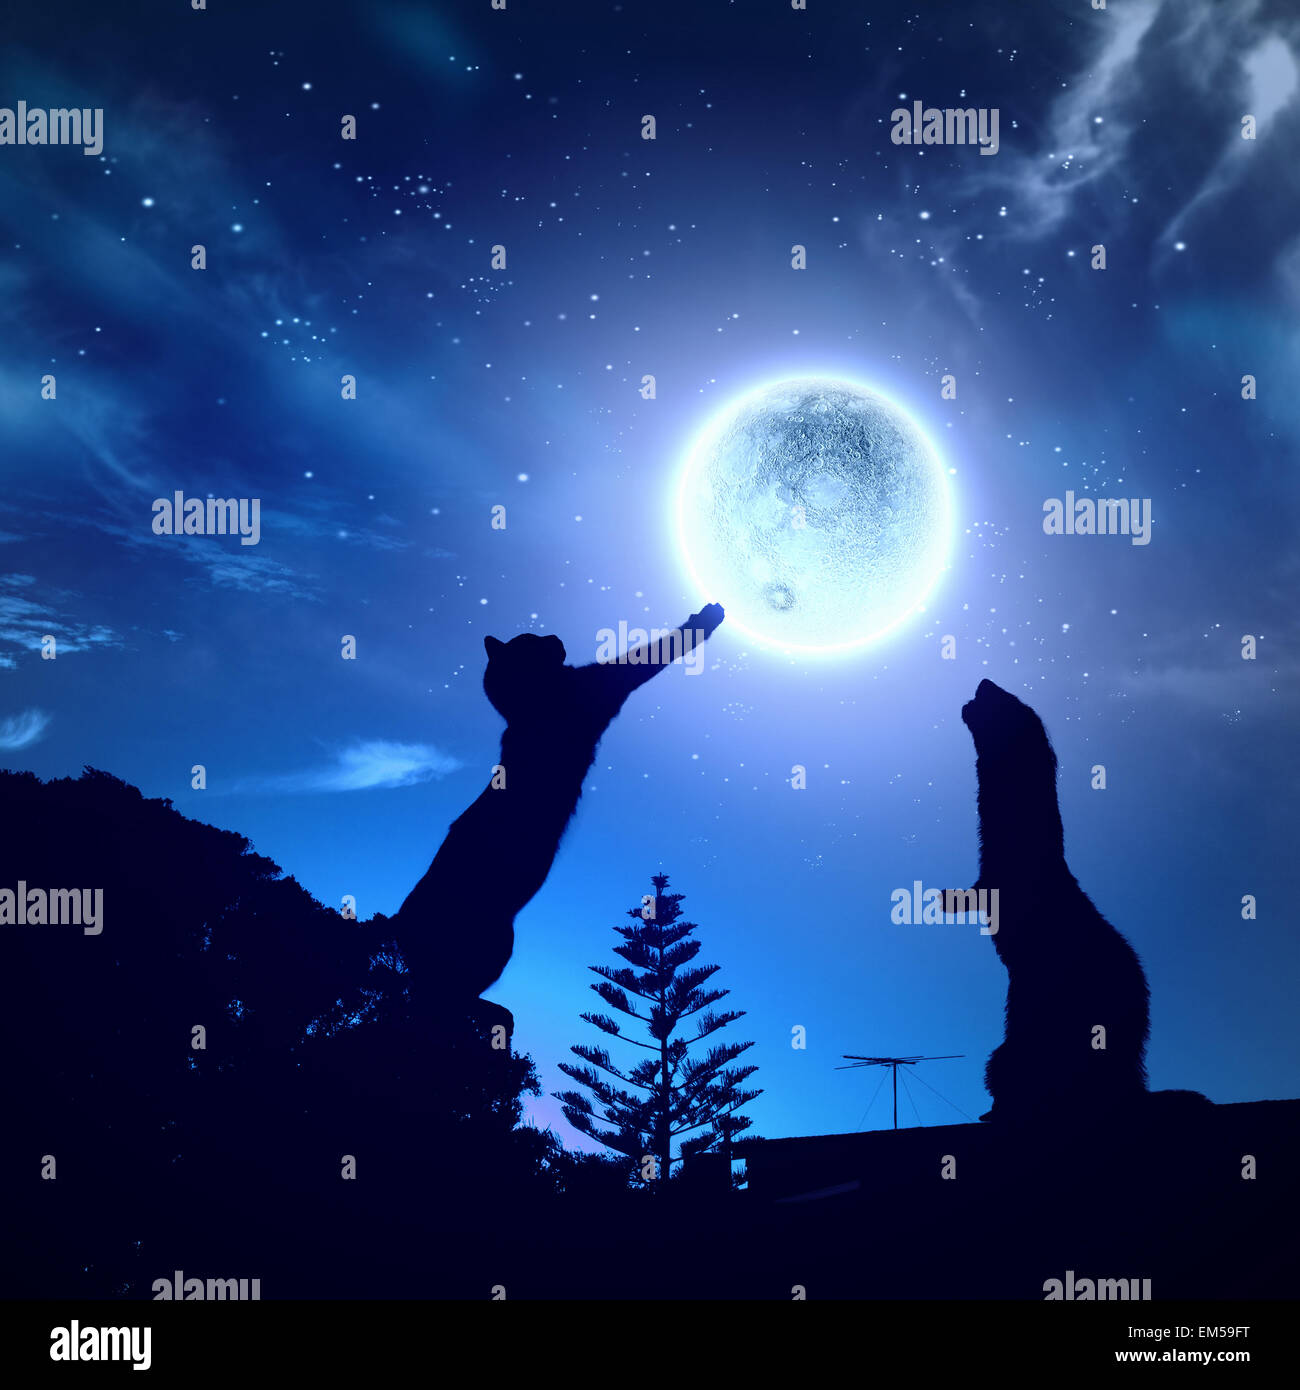 Silhouettes of animals in night sky Stock Photo